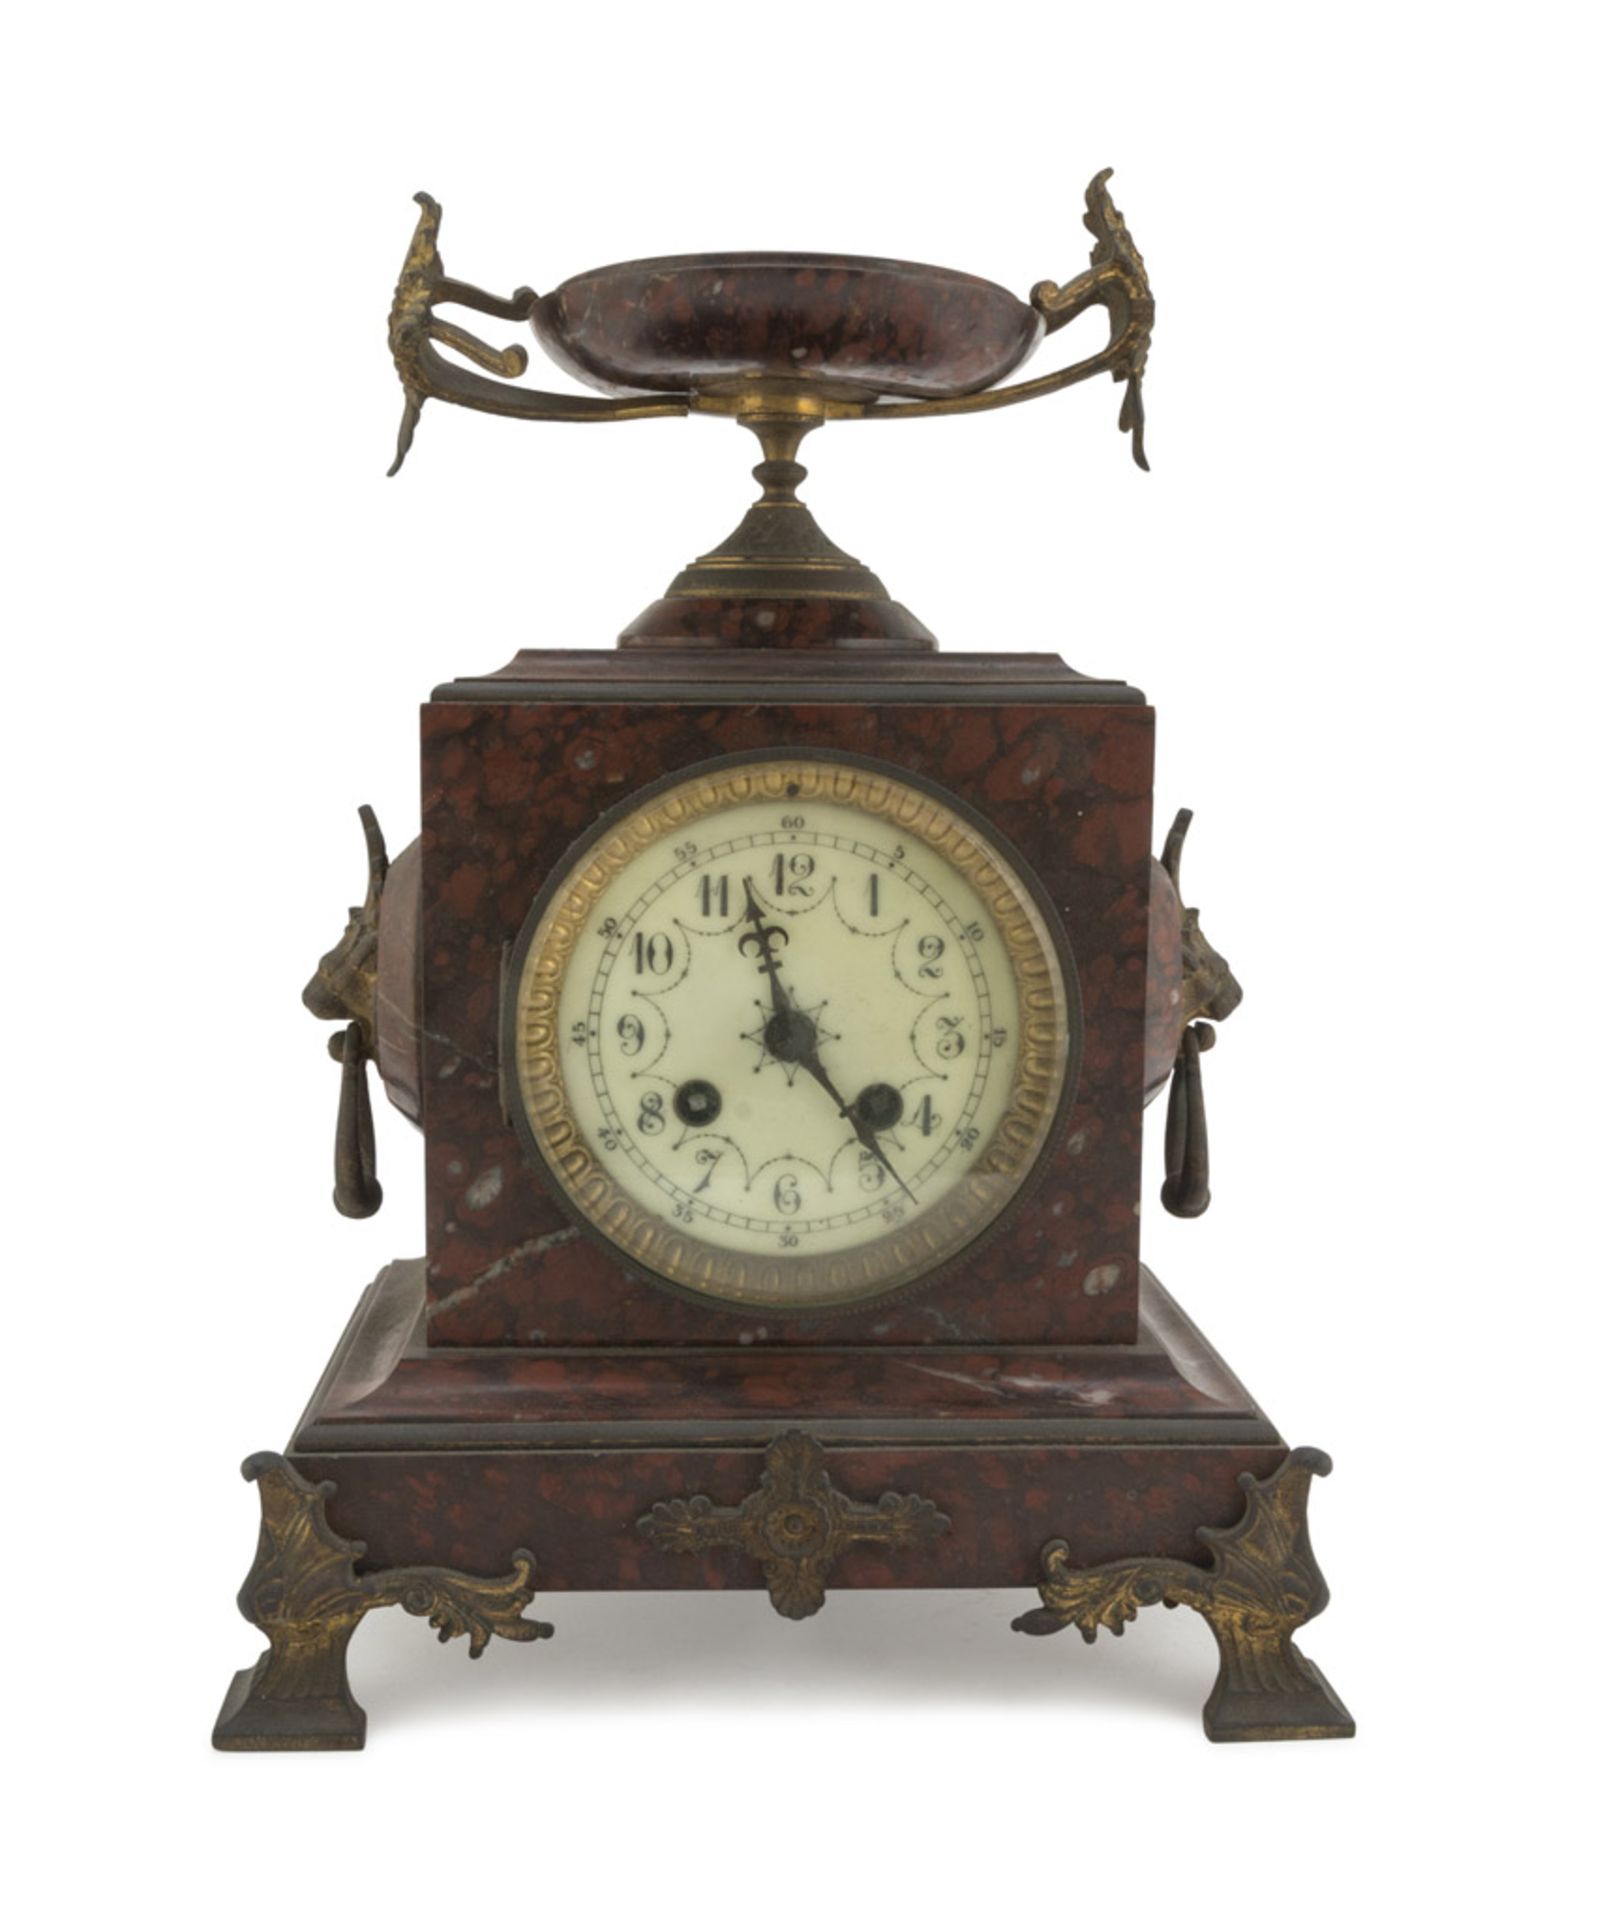 TABLE CLOCK, 19TH CENTURY case in red marble, white enamel dial and finishes in metal. Measures